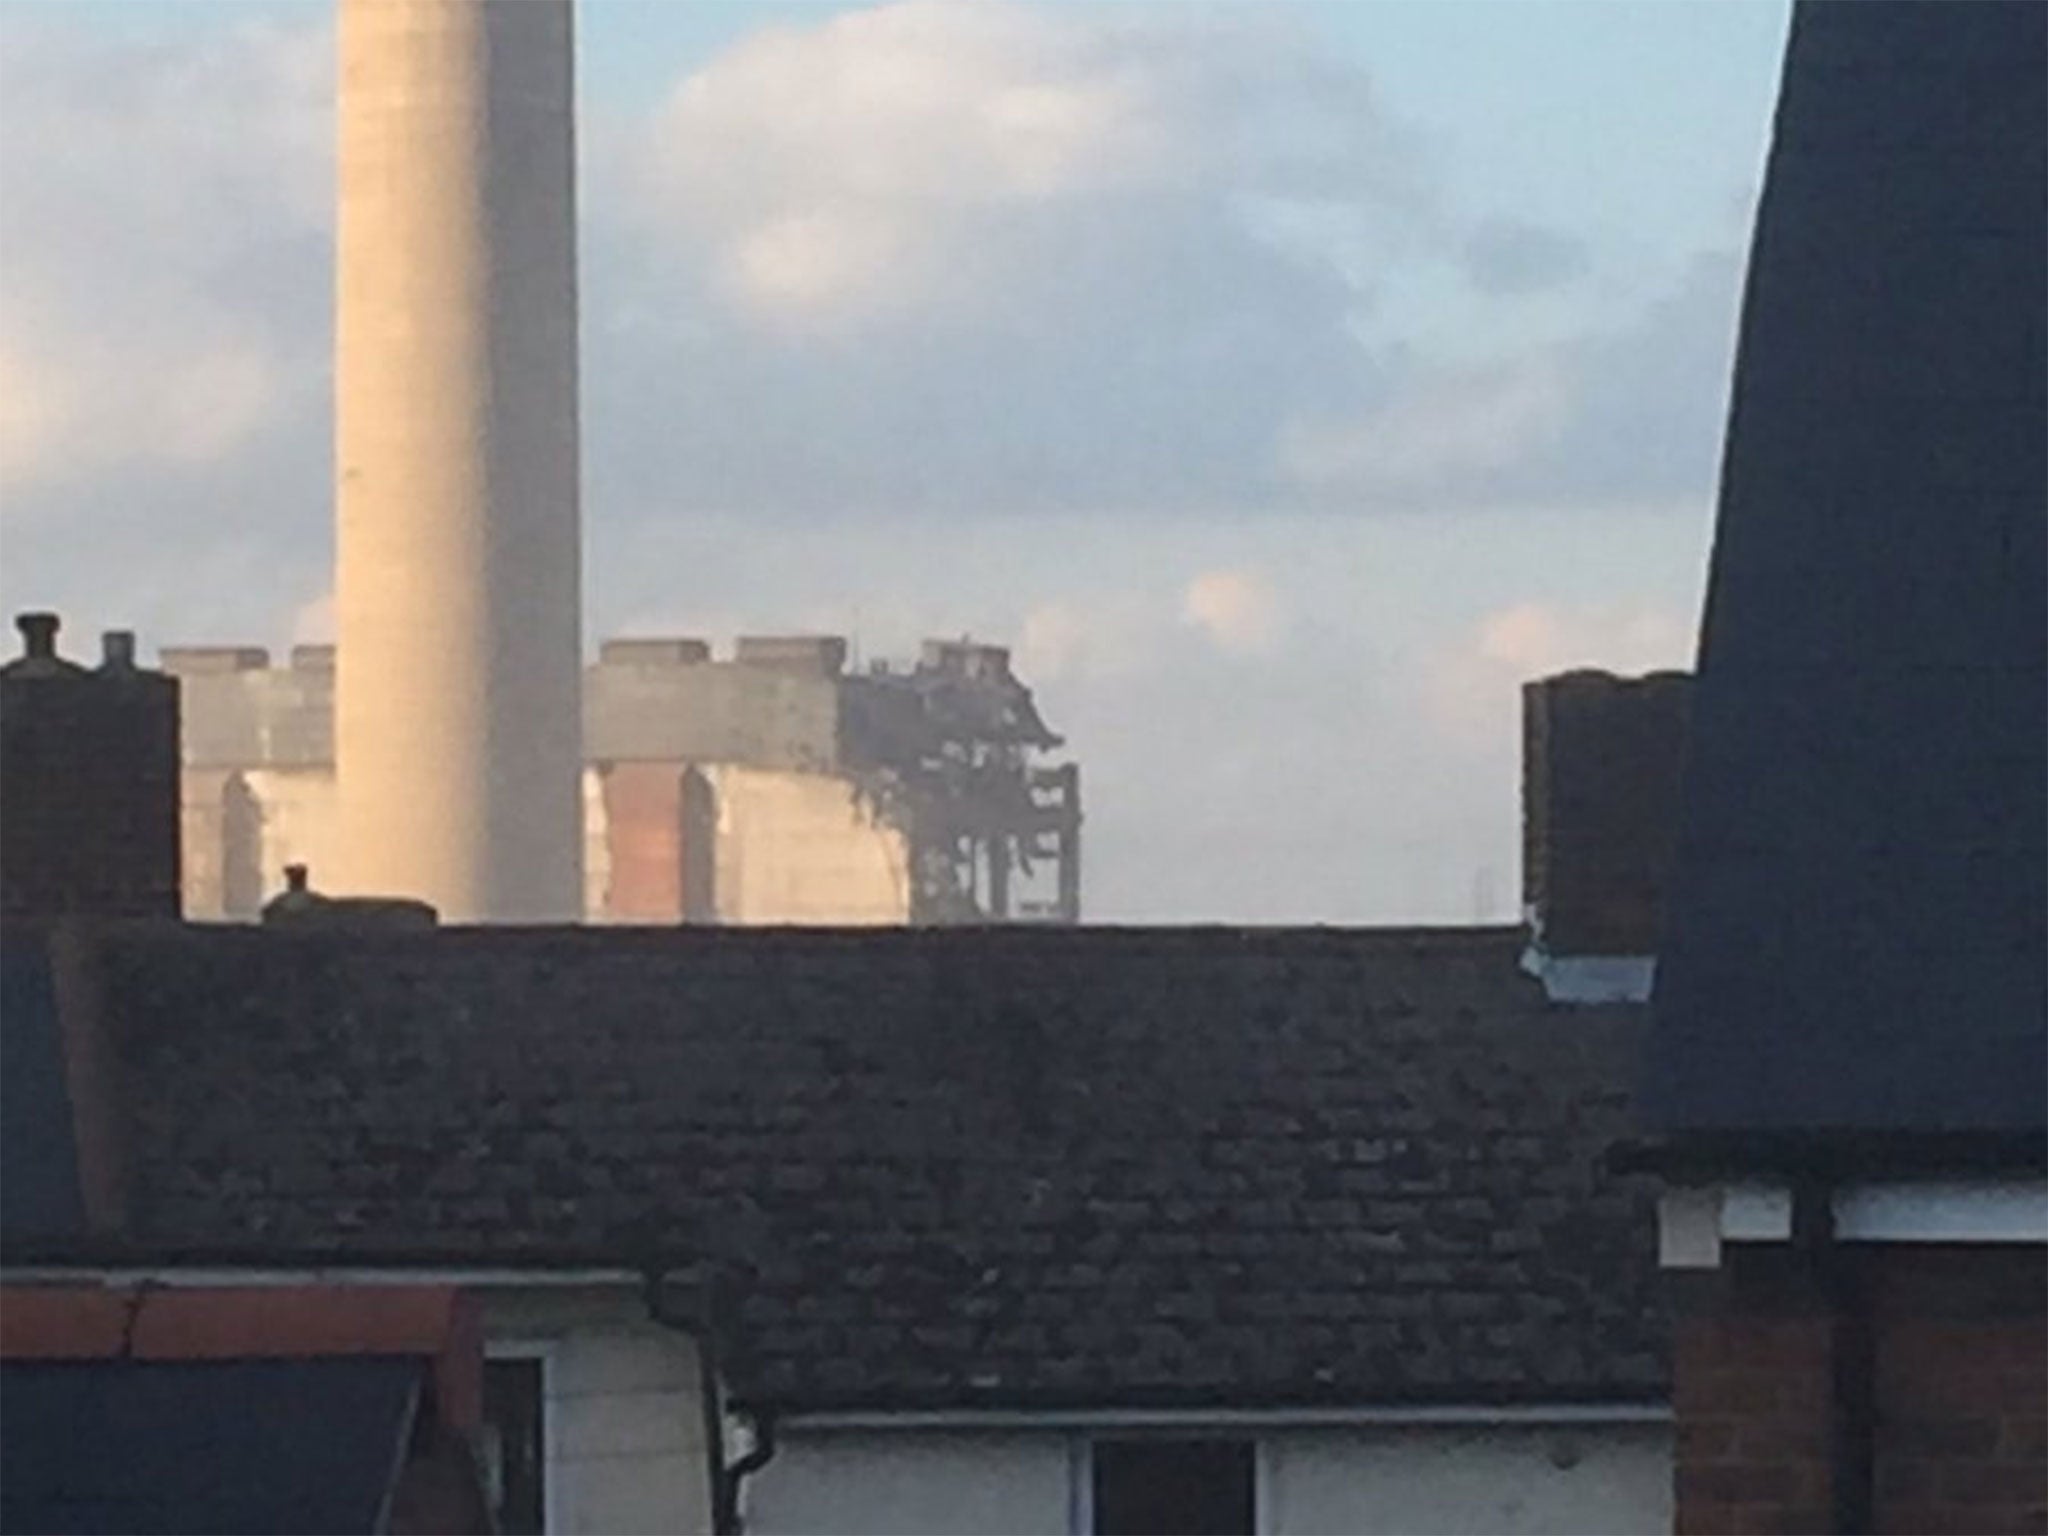 Didcot Power station seen after the explosion